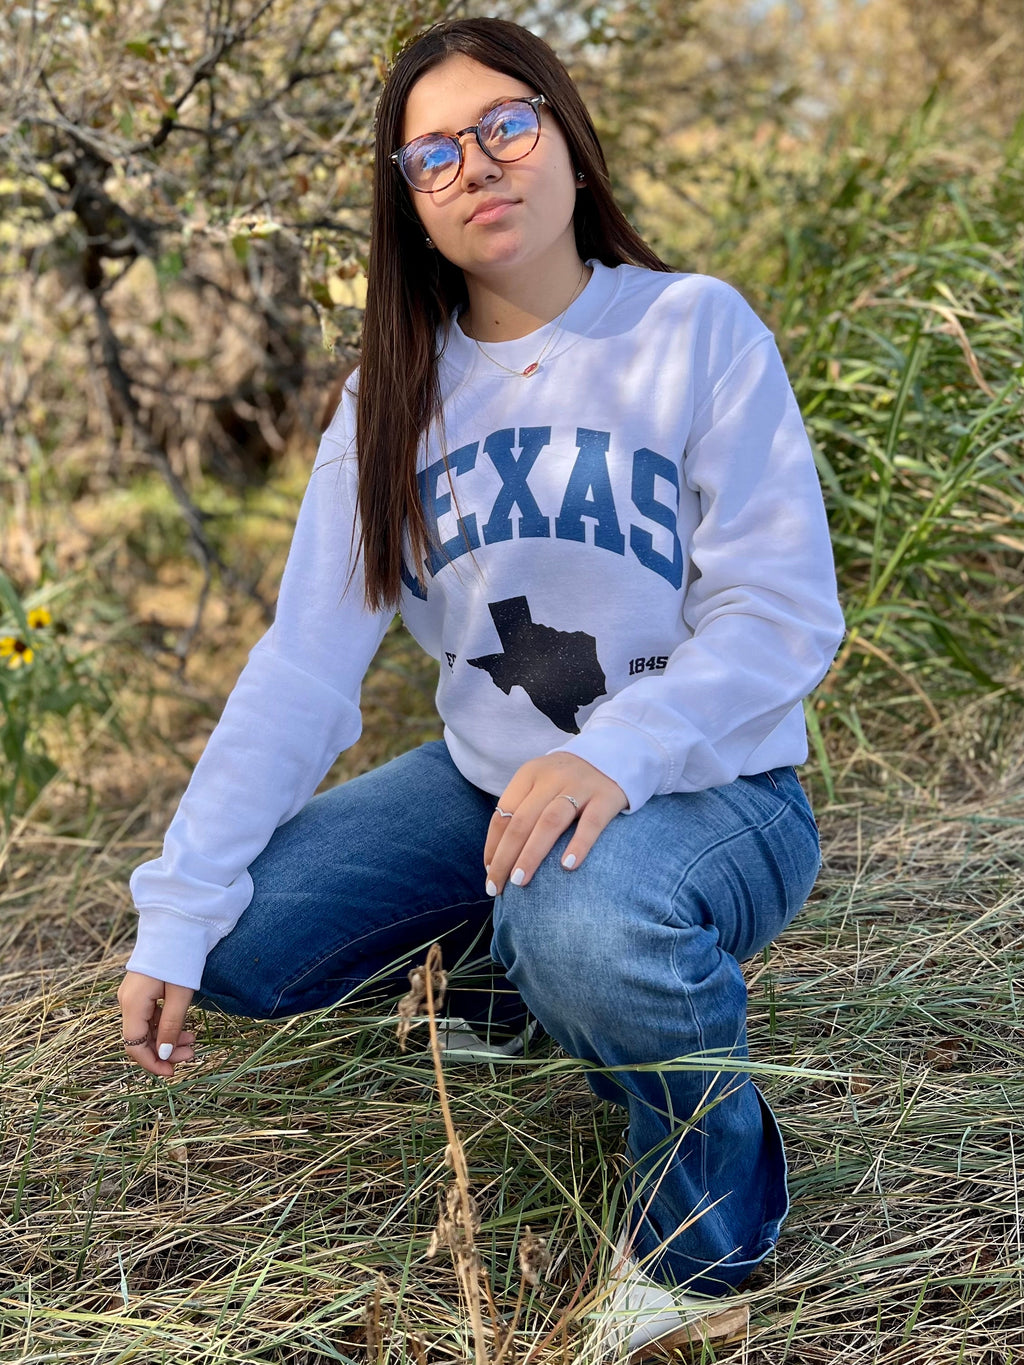 "TEXAS" sweatshirt. Trending style. Boutique. Small business. Woman owned.